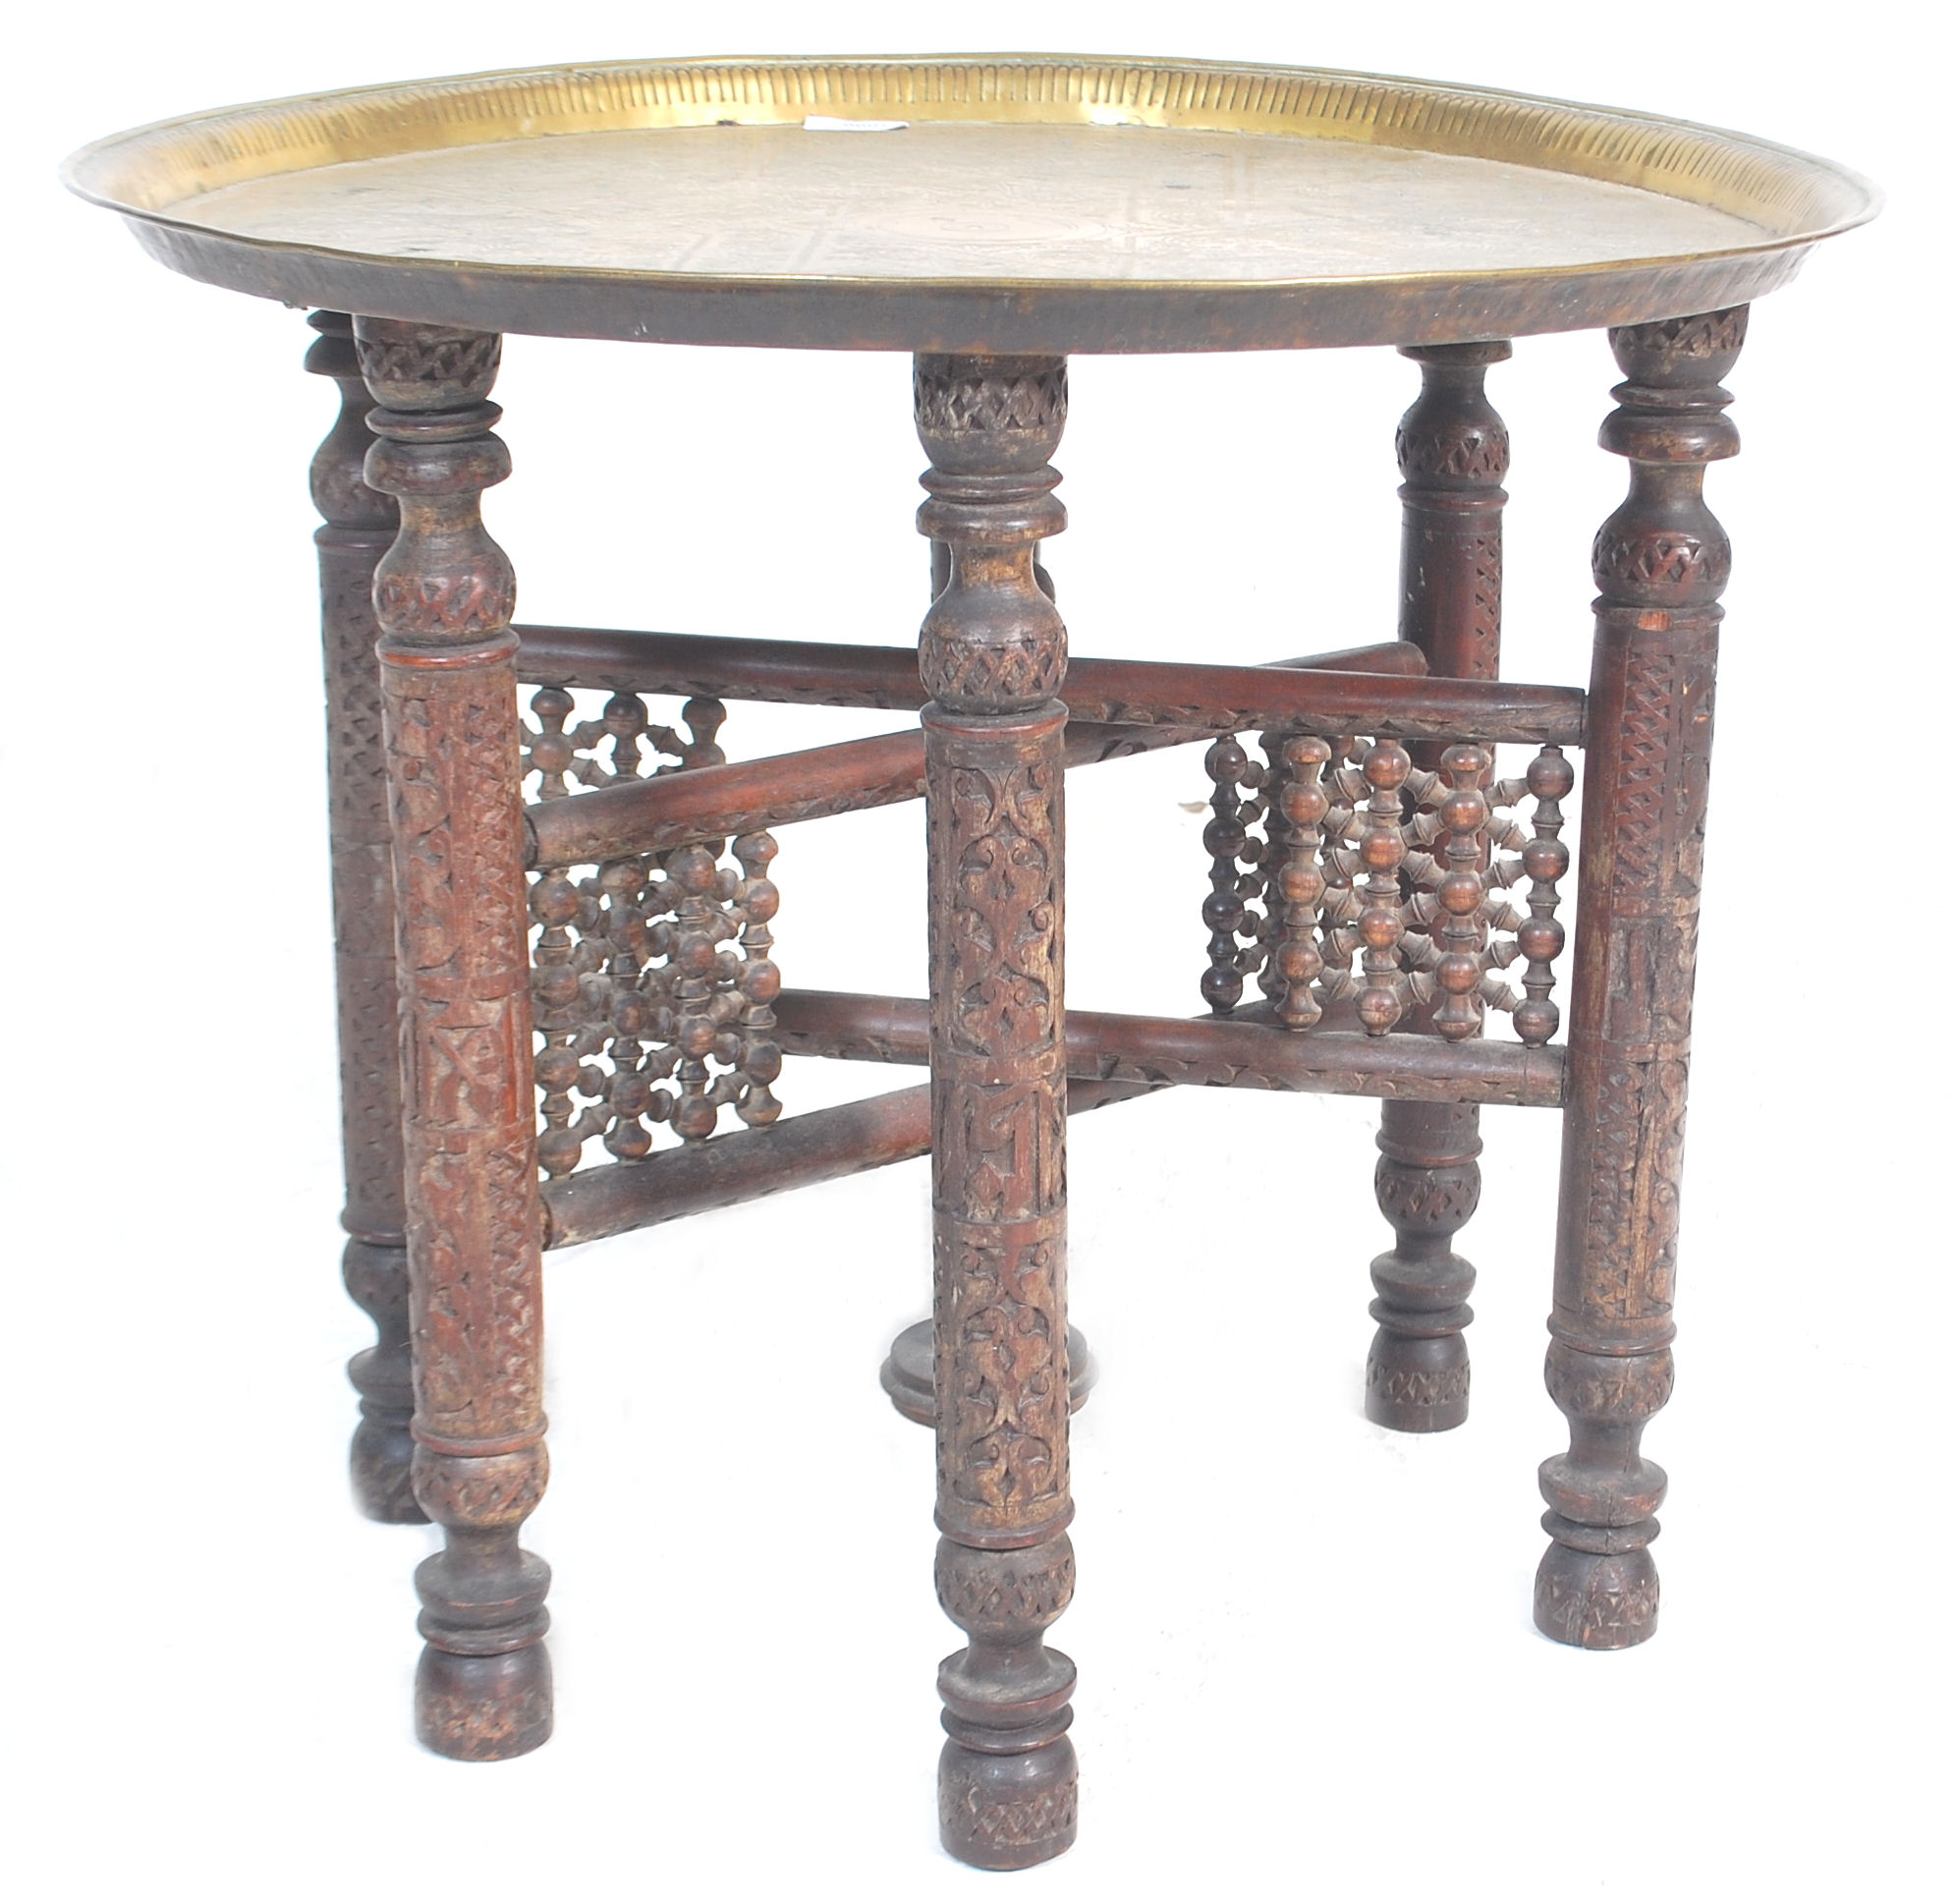 A 20th century brass top Moorish / Binares traders table having a brass chase decorated top with